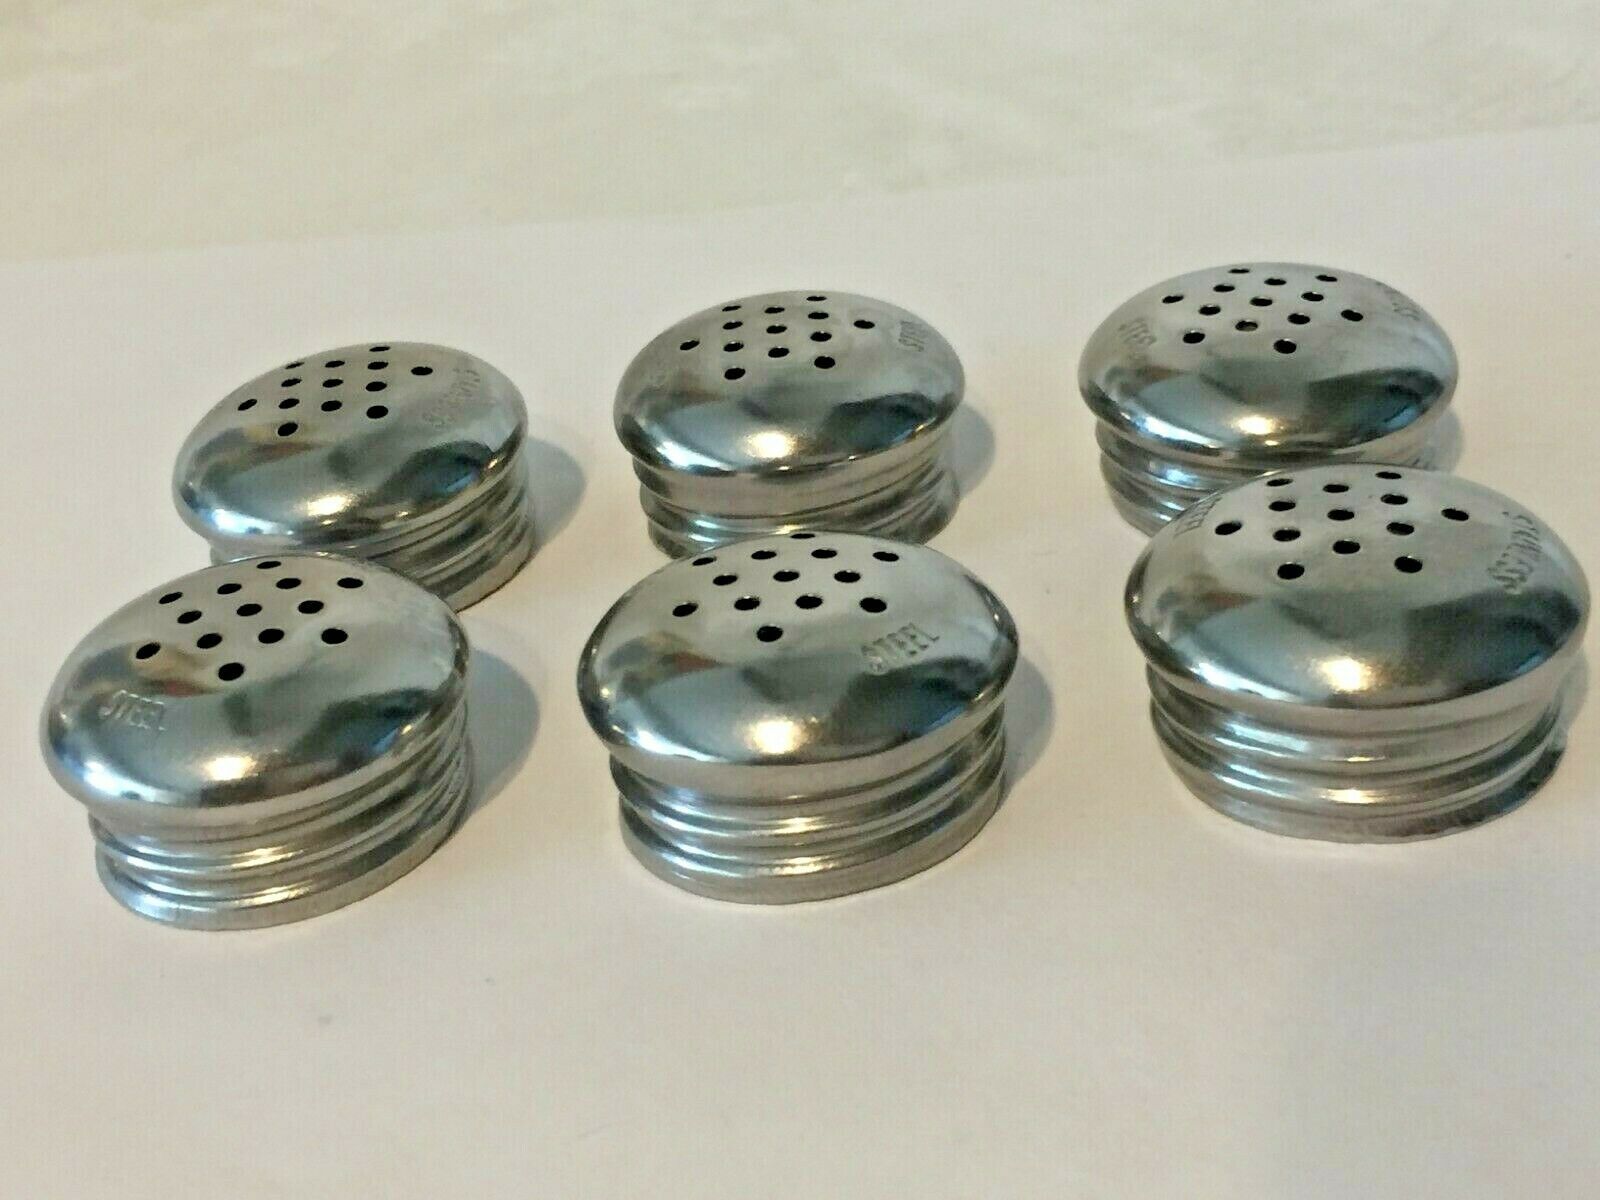 How Can I Find Replacement Tops For My Salt And Pepper Shakers?